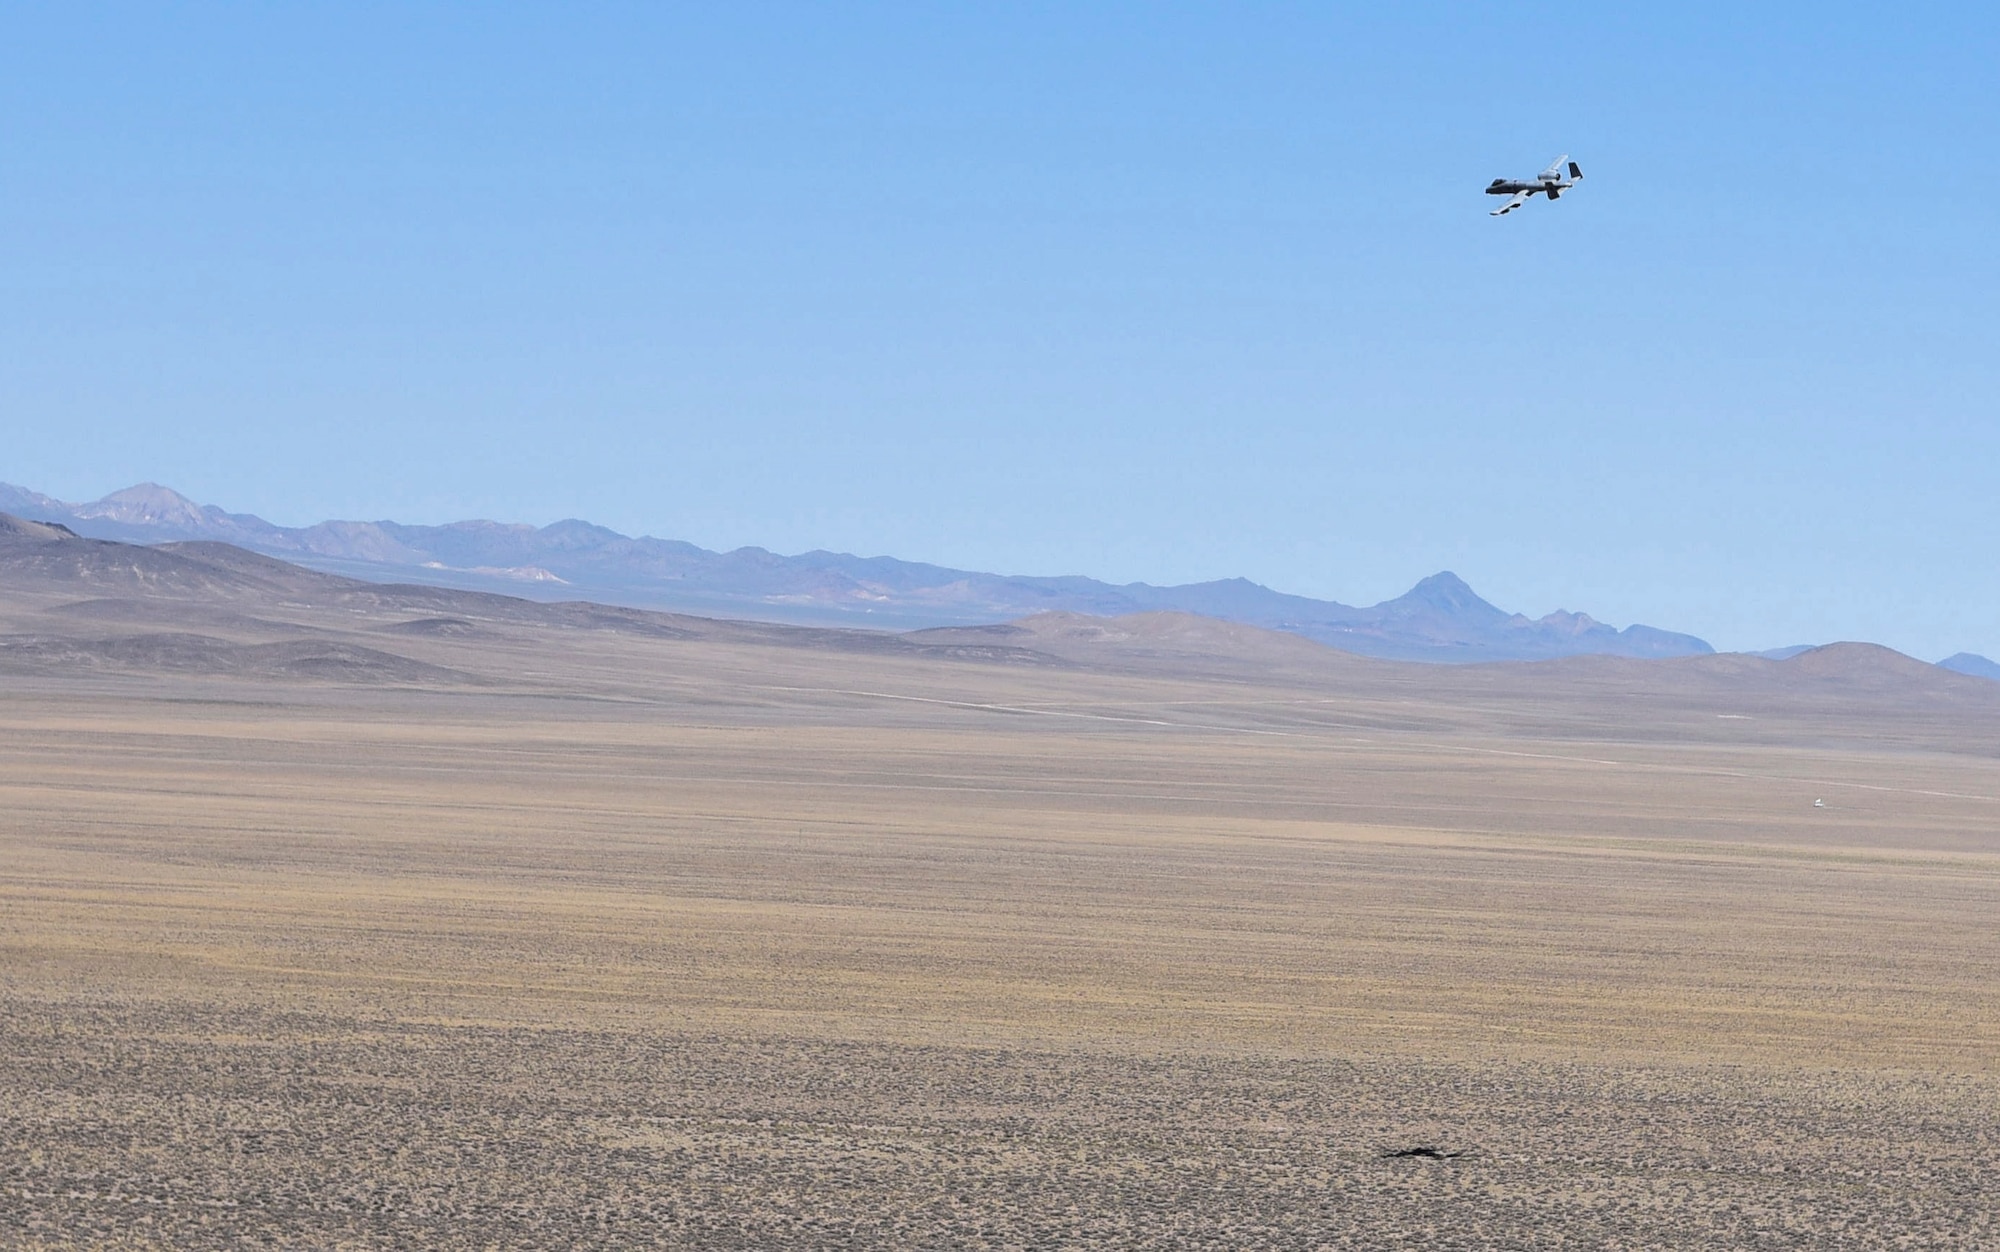 An A-10 Thunderbolt II, assigned to the 57th Wing, provides close ground support for a simulated combat search and rescue exercise during a Weapons School Integration mission at the Nevada Test and Training Range June 1, 2017. The Thunderbolt II is capable of providing close air support, and attacking ground targets like tanks and other armored vehicles. (U.S. Air Force photo by Airman 1st Class Andrew D. Sarver/Released)